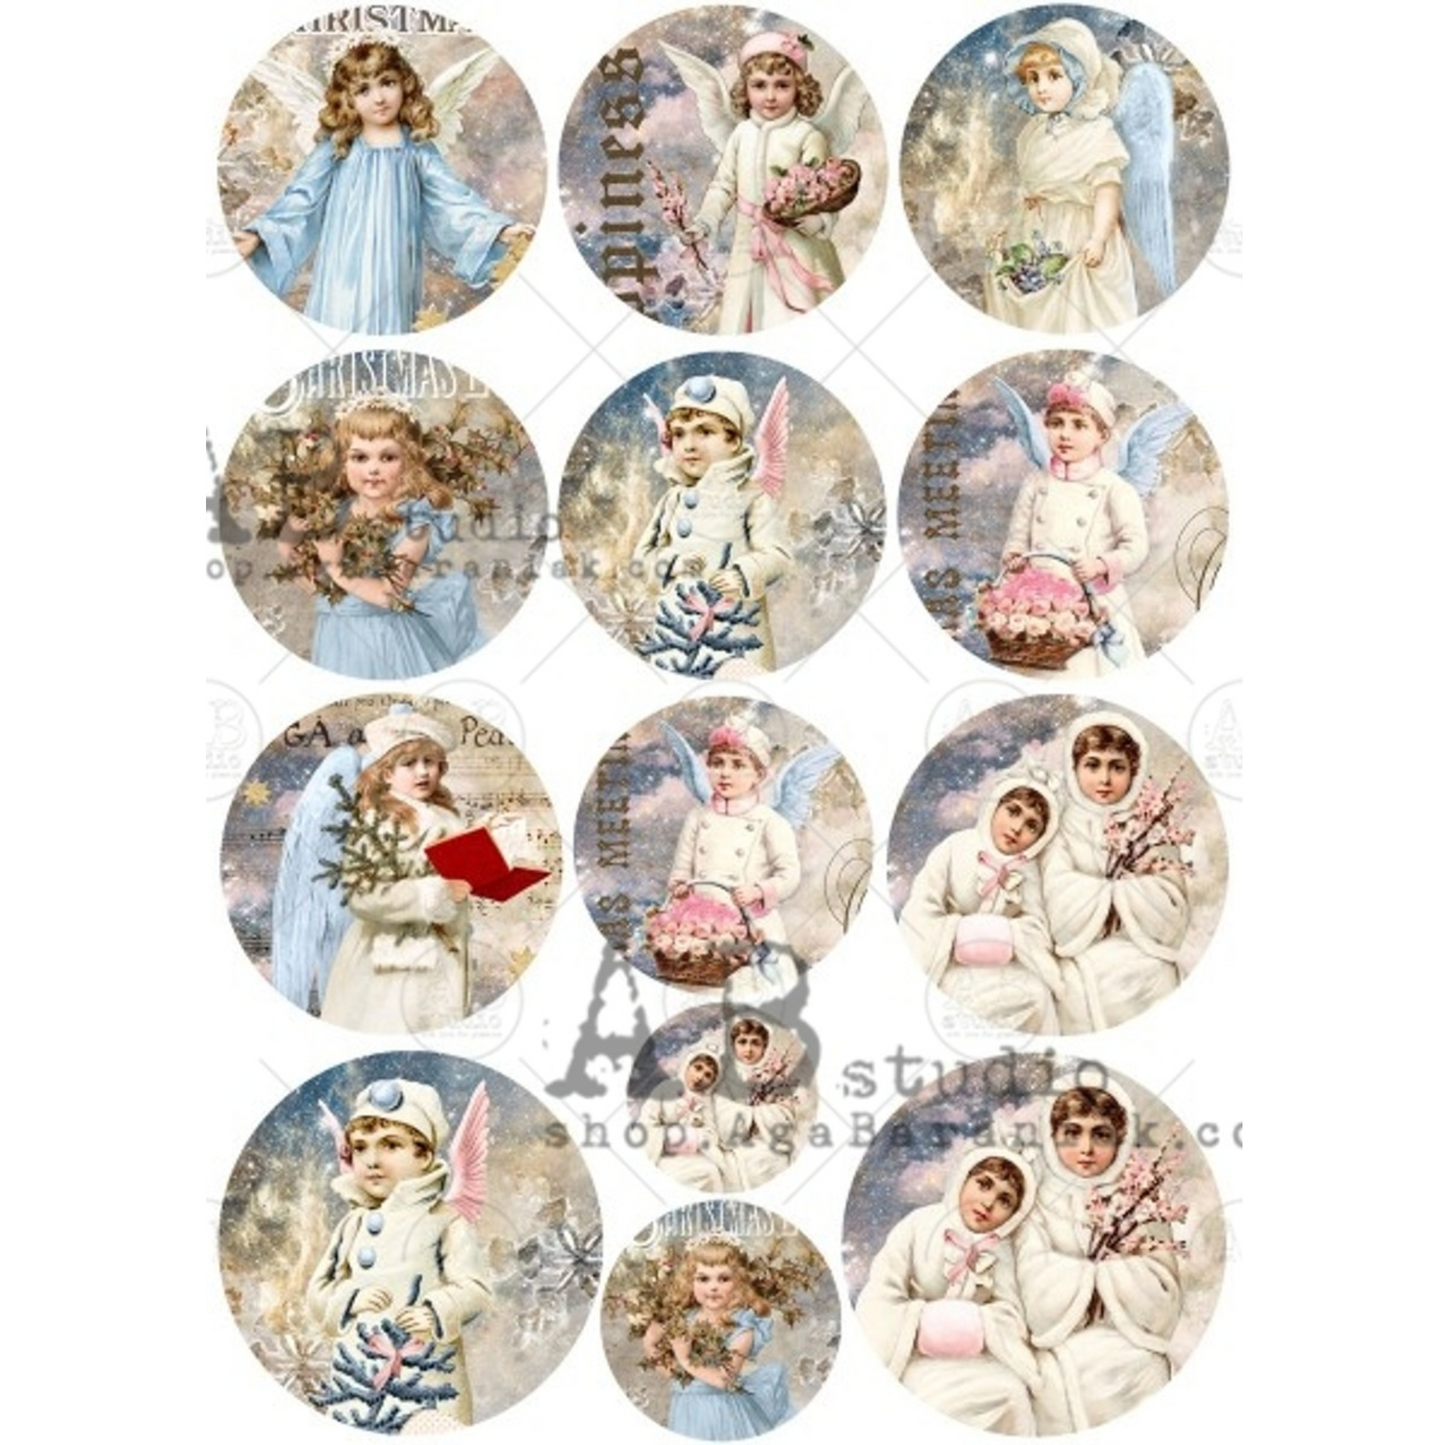 "Shabby Winter Children Round Scenes" decoupage rice paper by AB Studio. Available at Milton's Daughter.